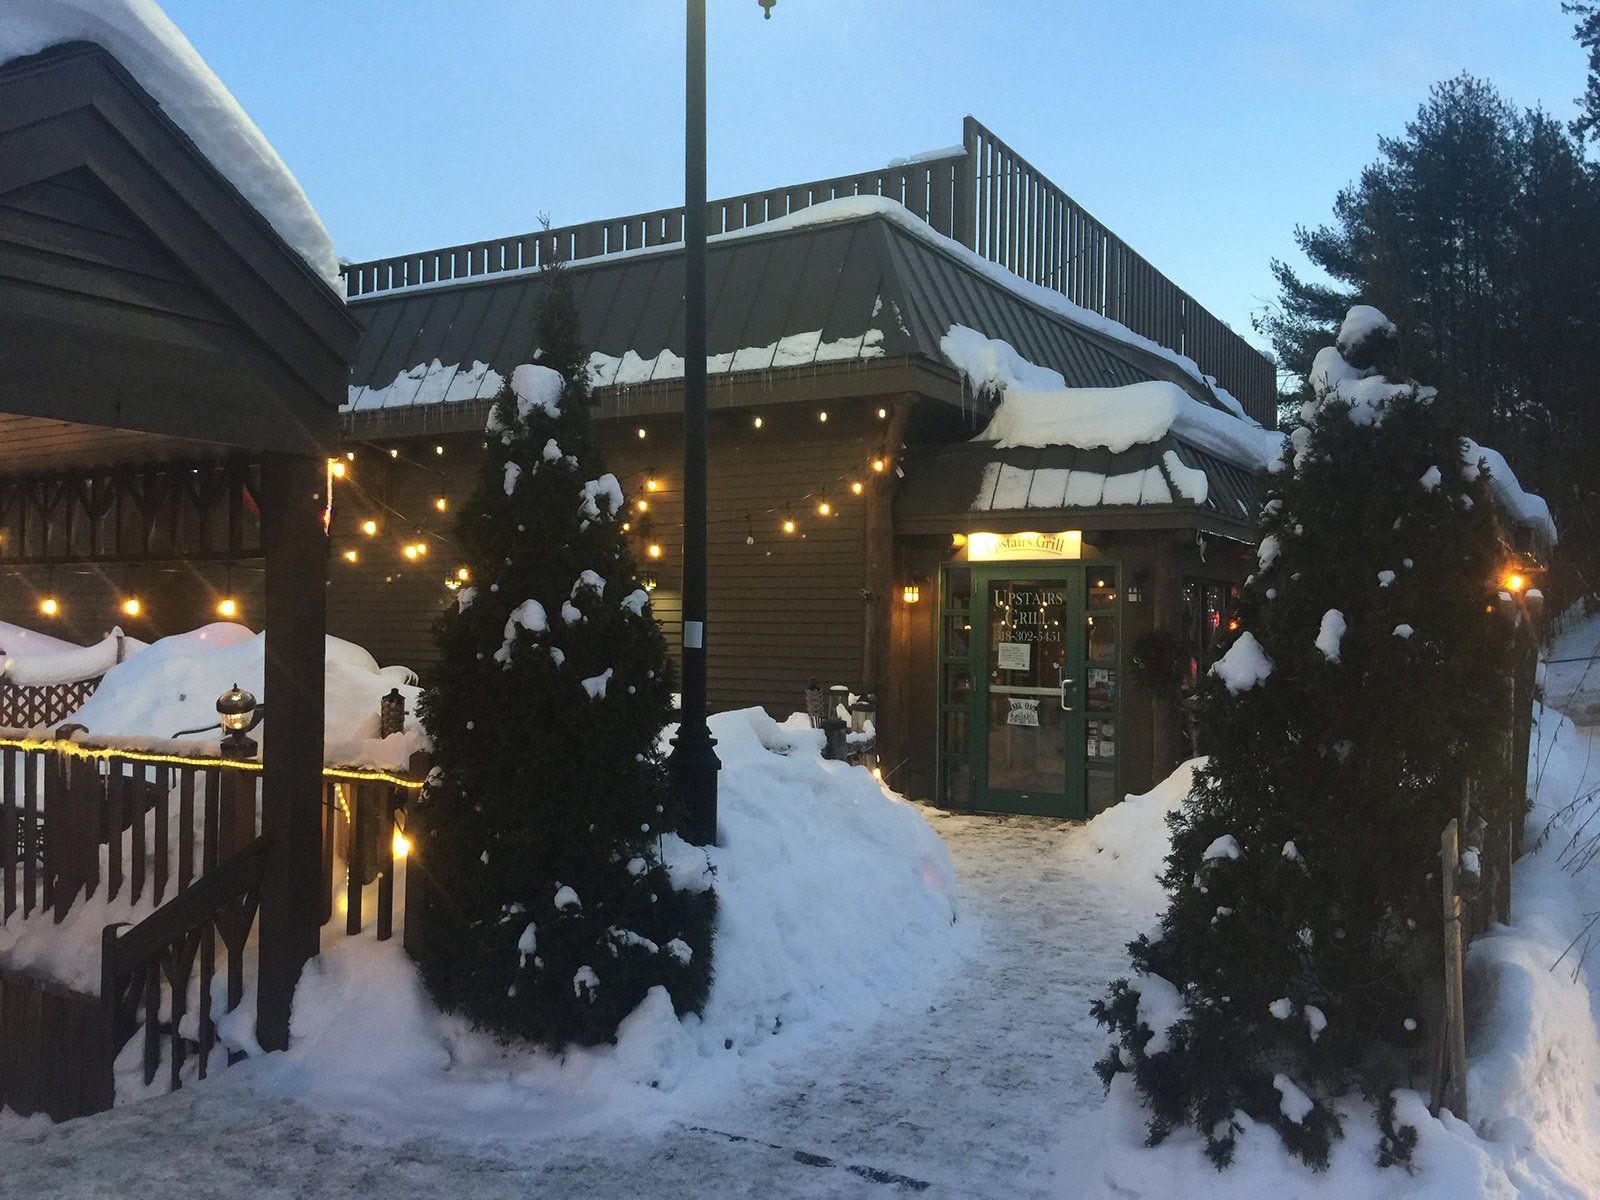 Upstairs Grill Restaurant in the winter with snow and lights.